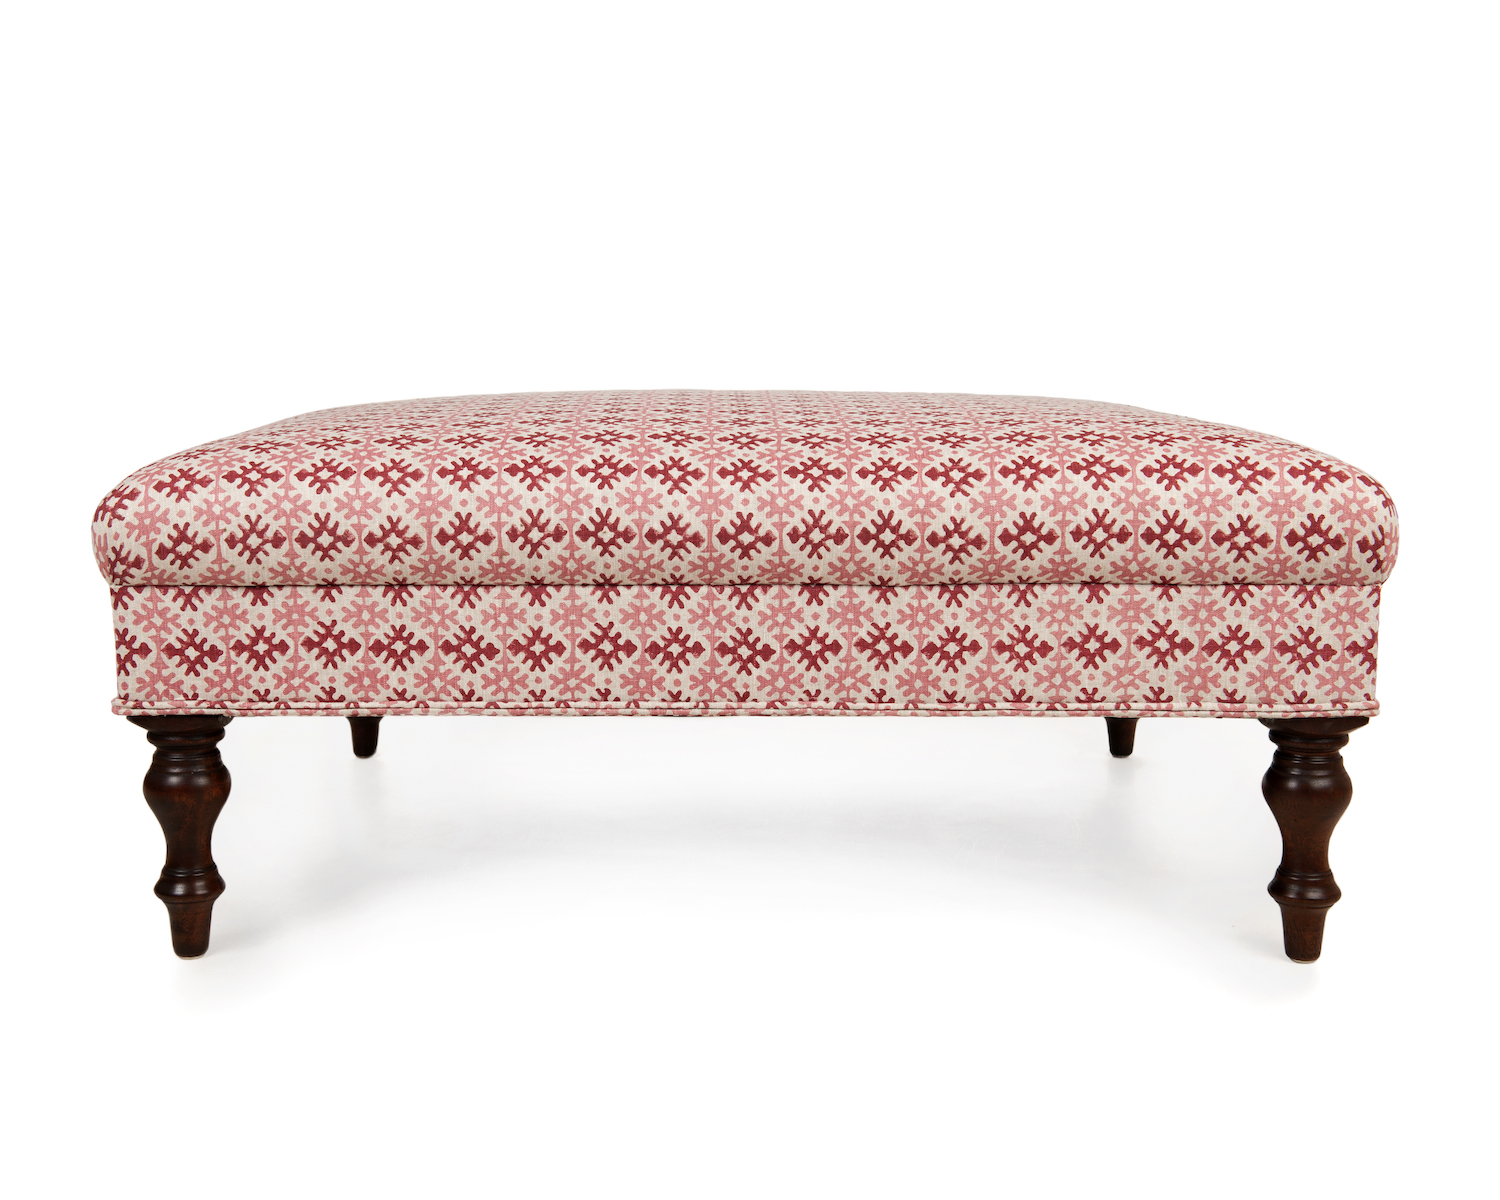 Roll Top Footstool with Self-Double Piping and Turned Legs In Abstract Motif Fabric